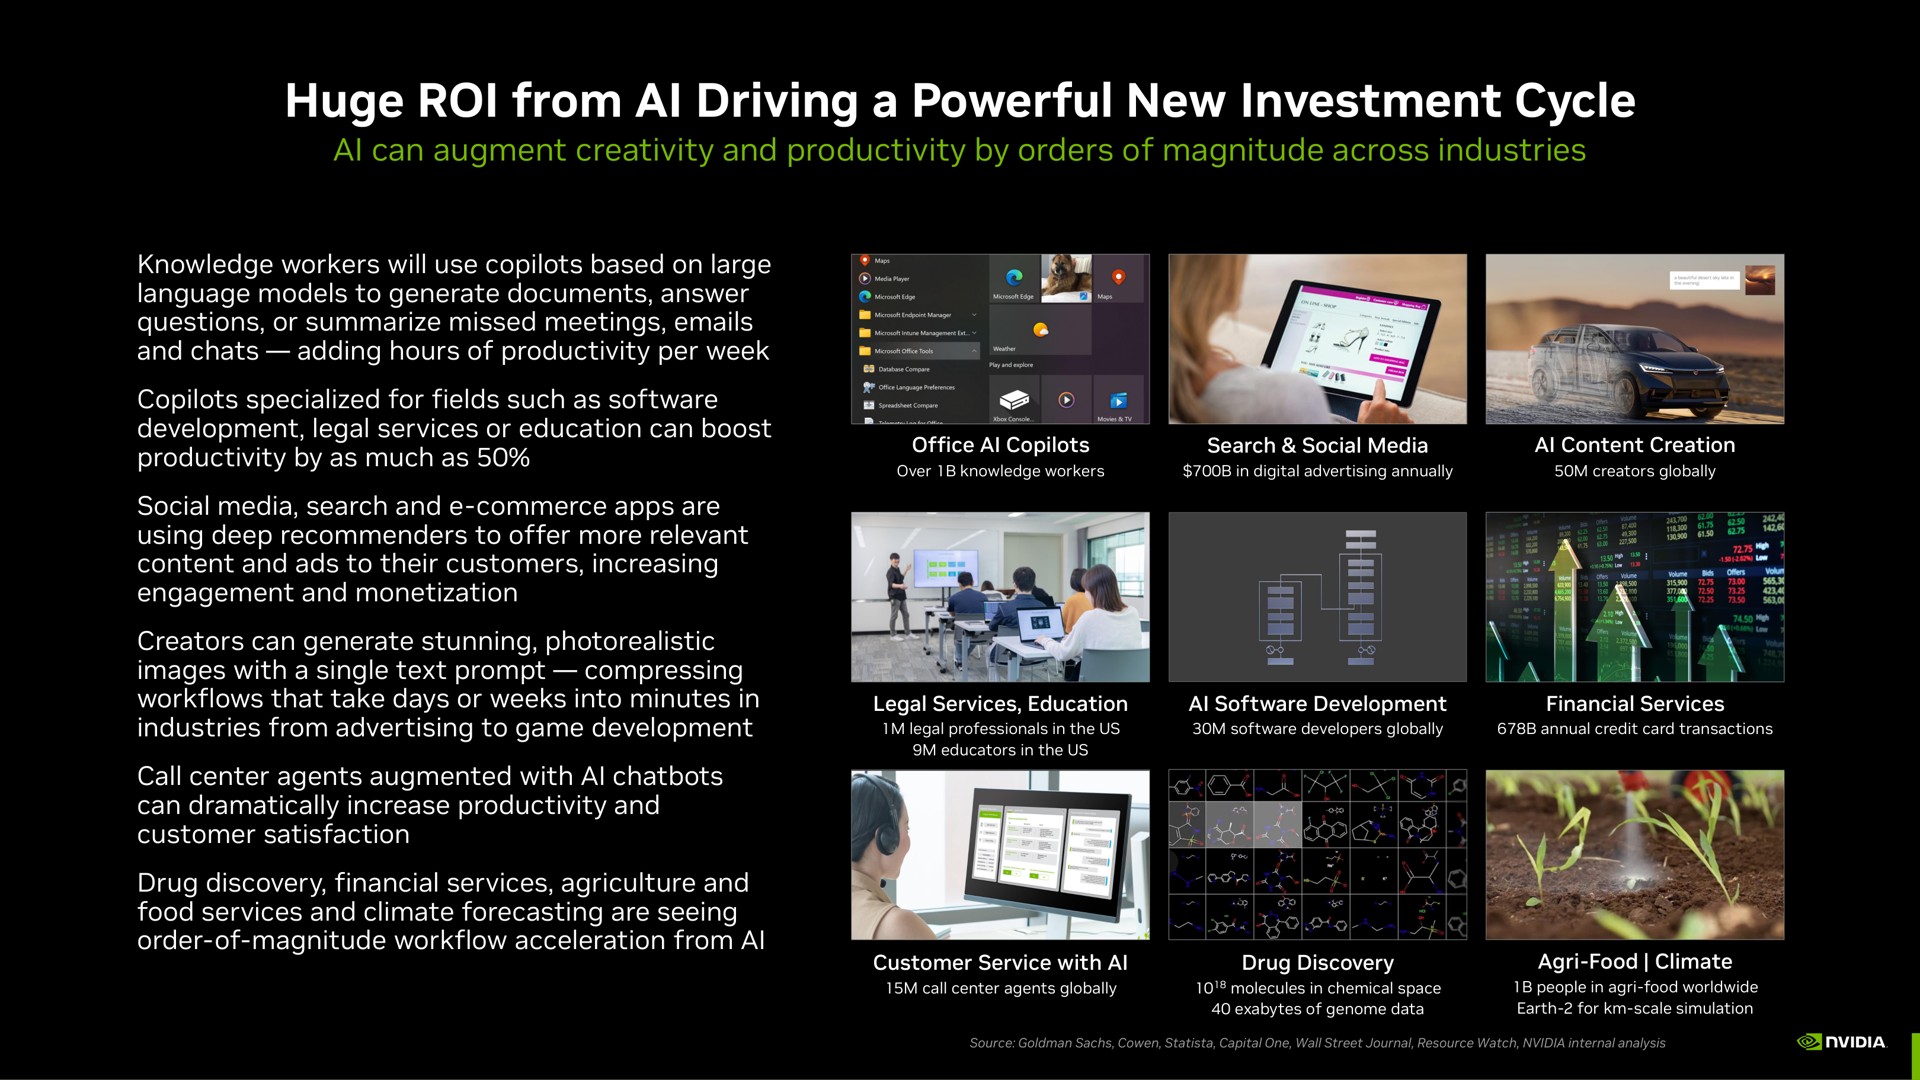 huge roi from driving a powerful new investment cycle | NVIDIA